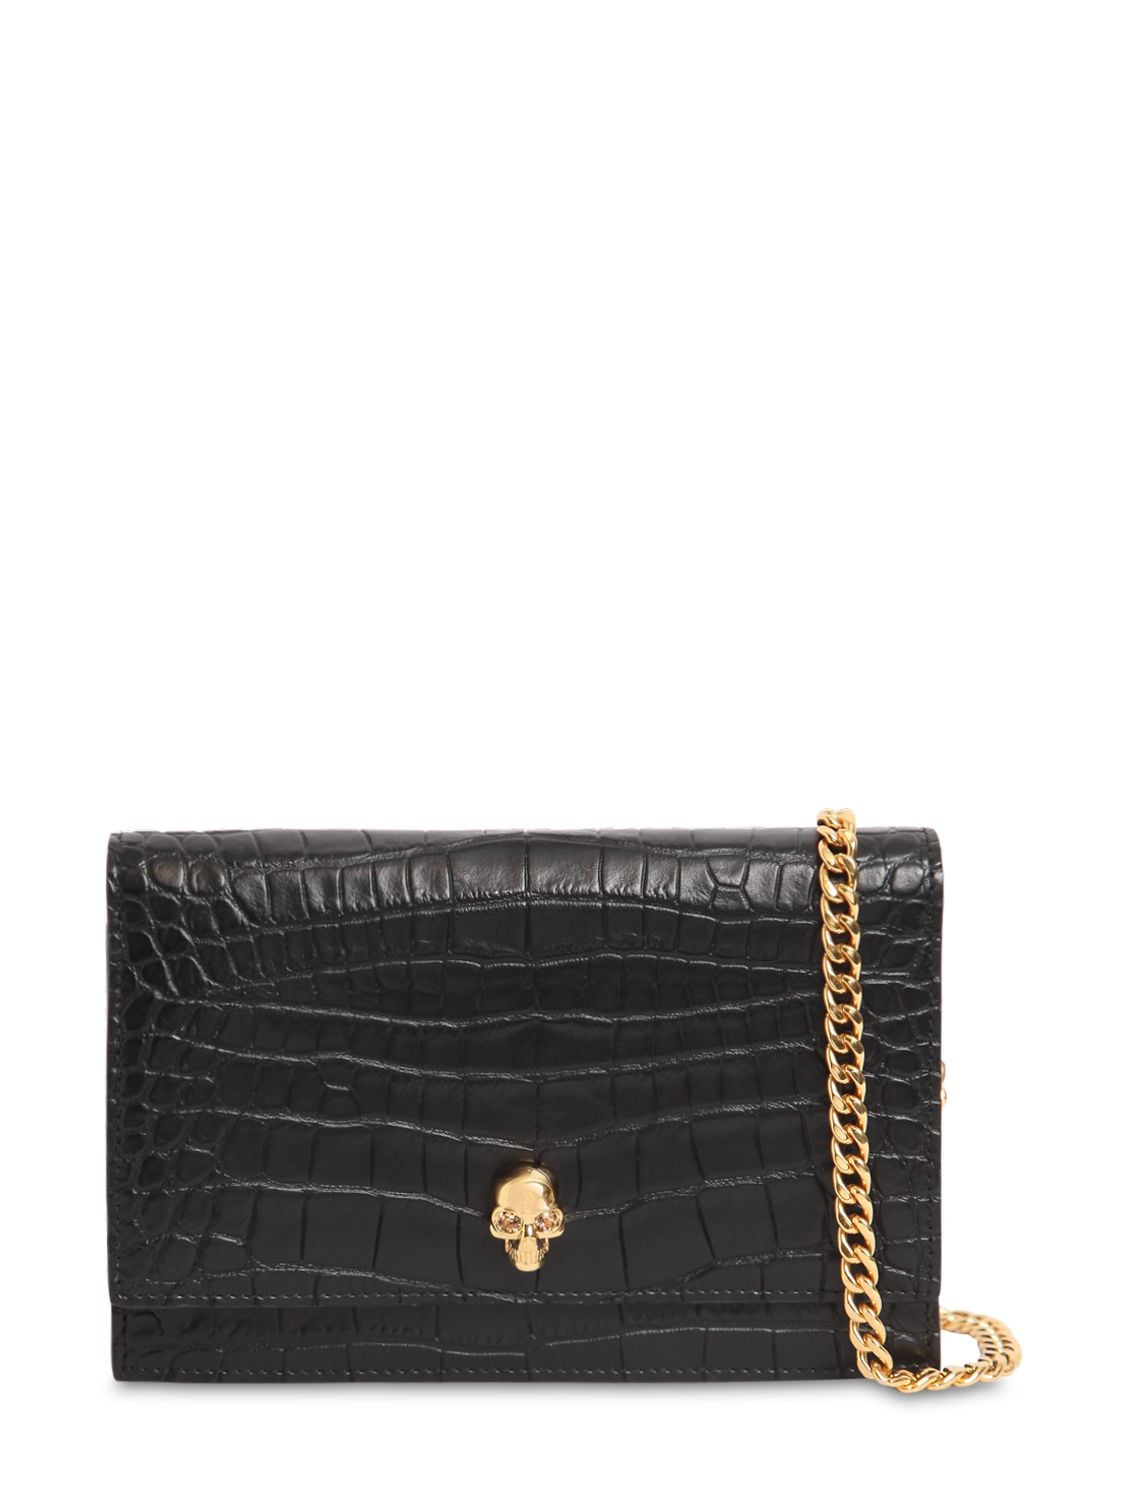 Image of Small Skull Croc Embossed Leather Bag